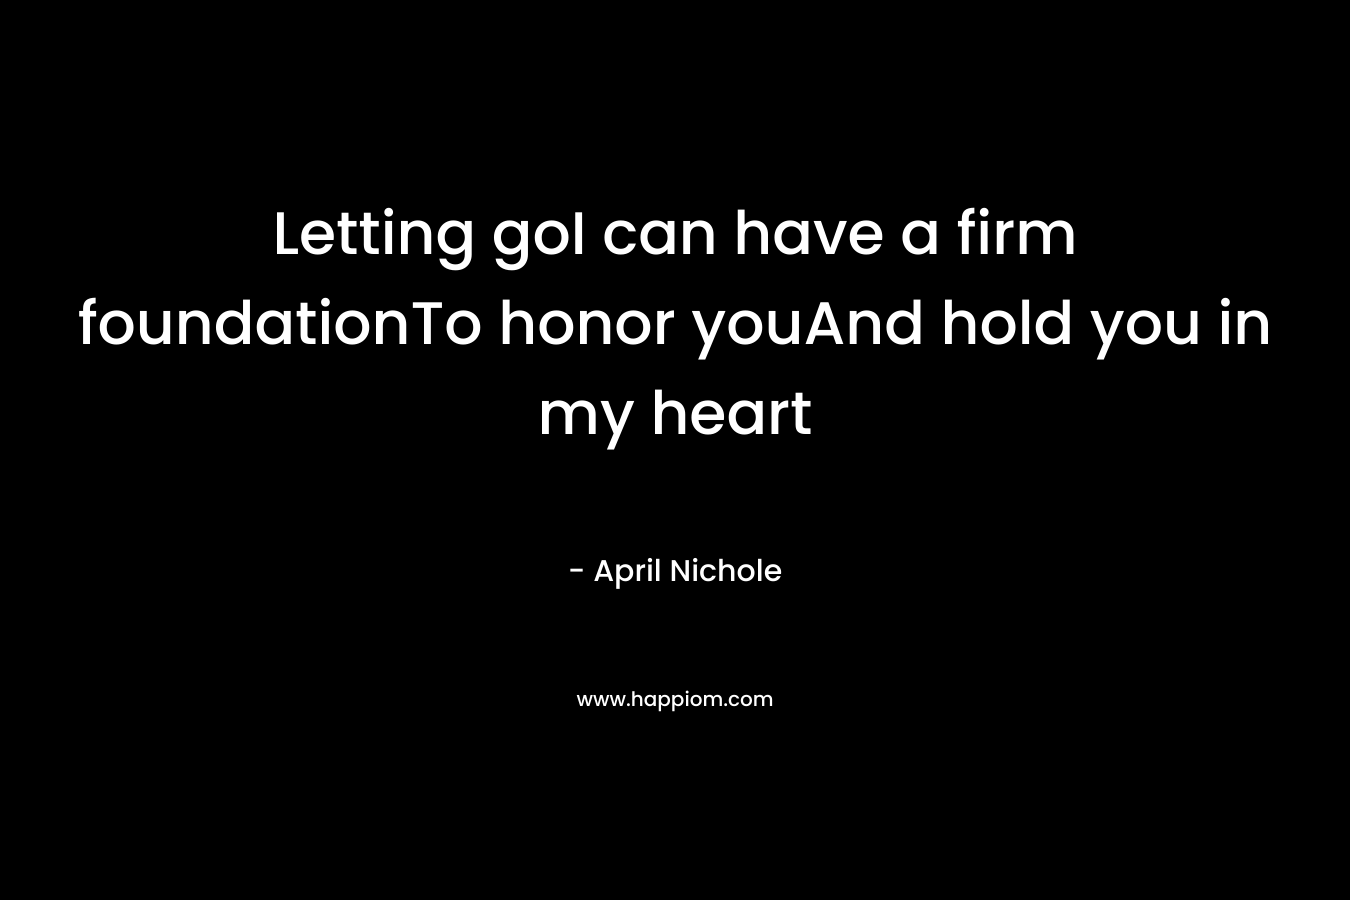 Letting goI can have a firm foundationTo honor youAnd hold you in my heart – April Nichole